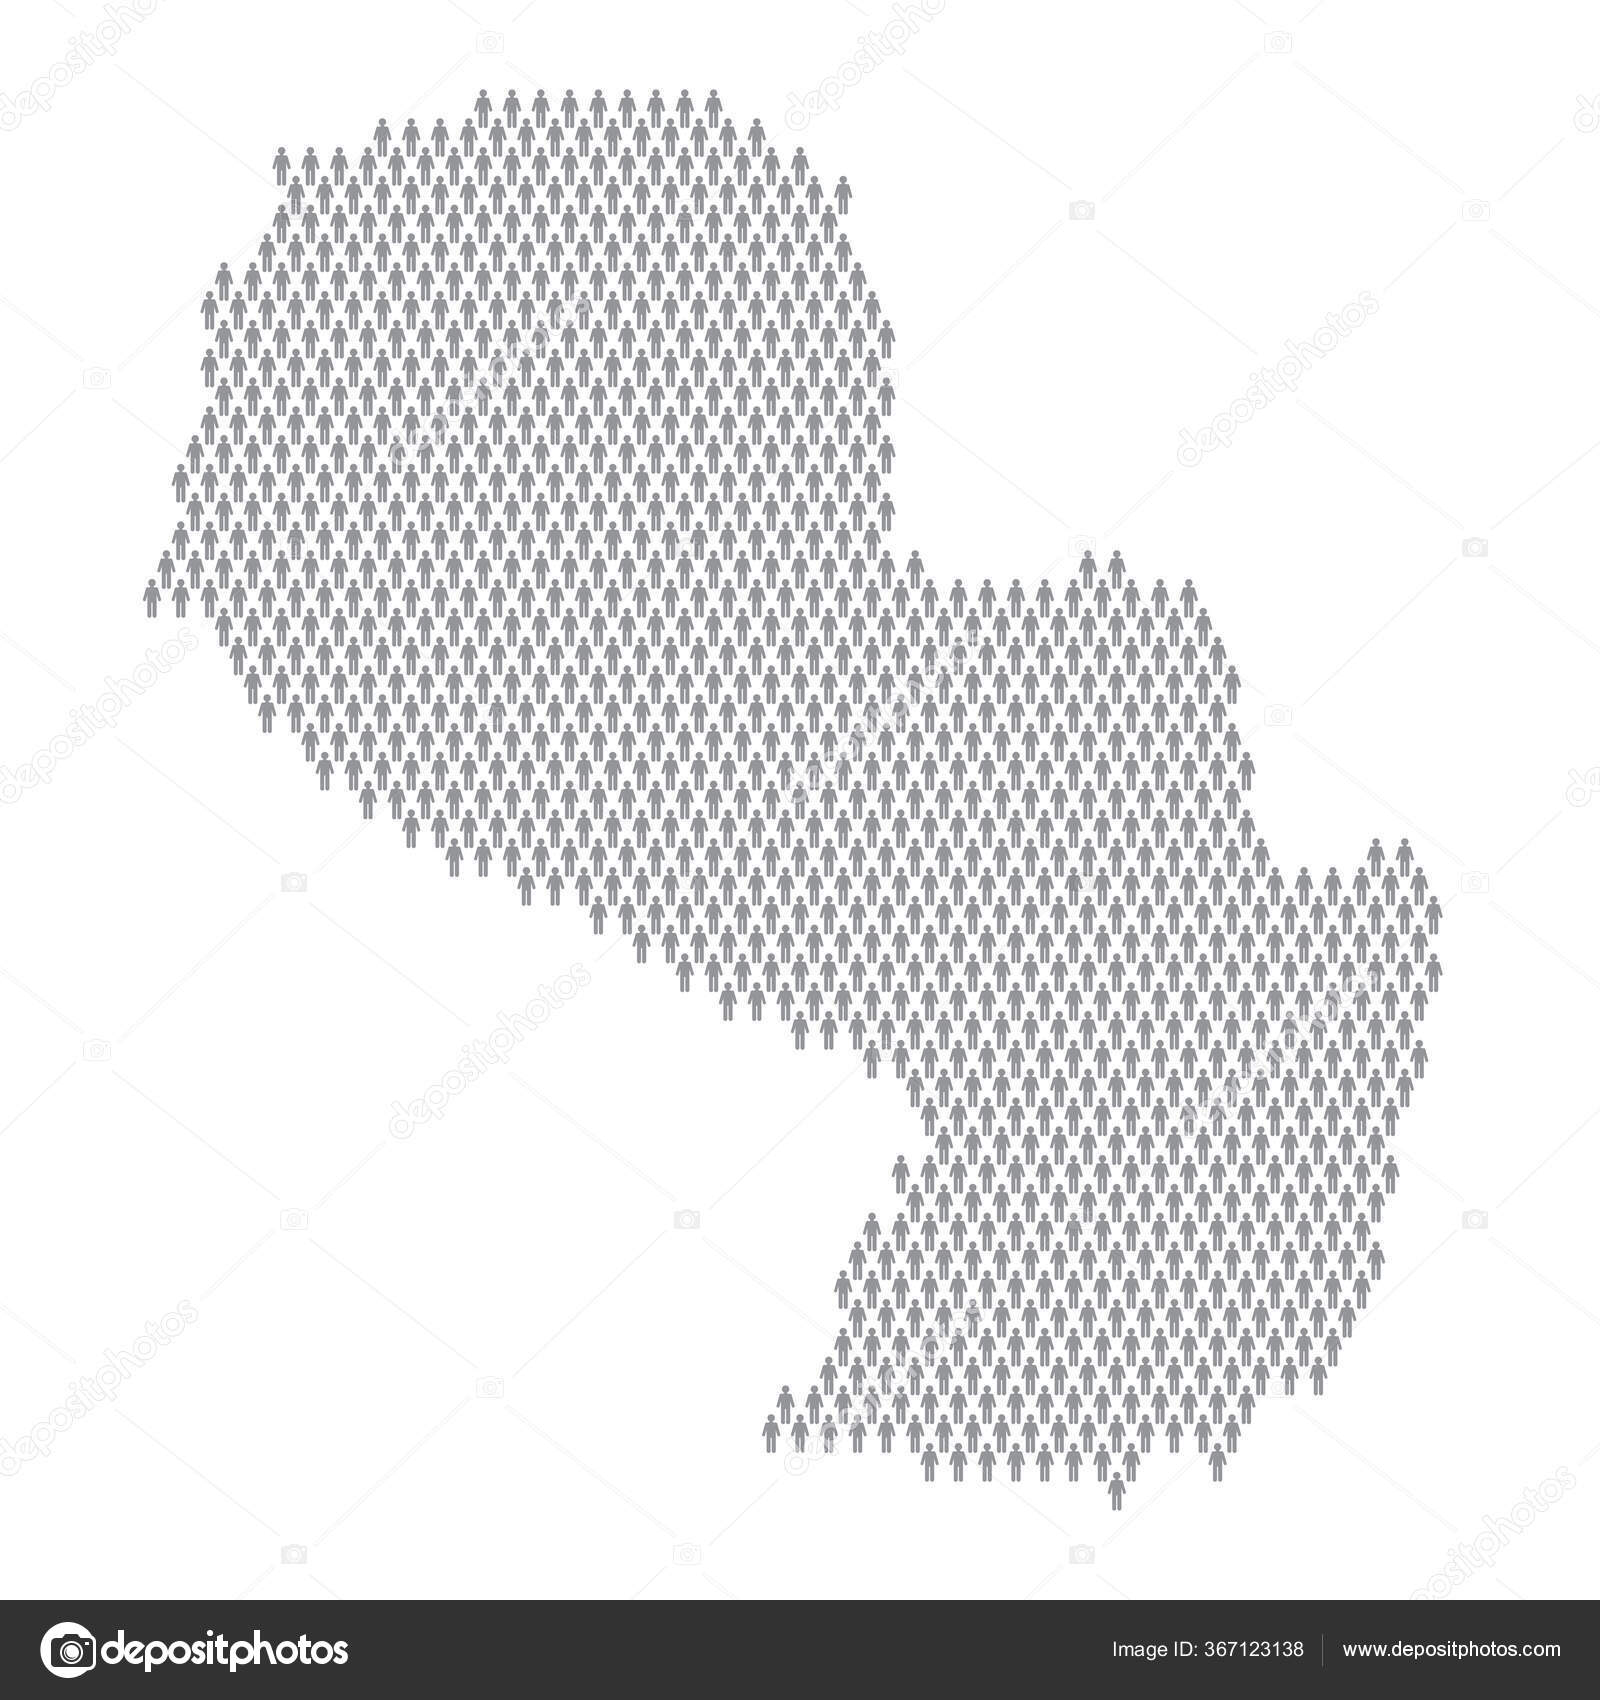 Paraguay population infographic. Map made from stick figure people